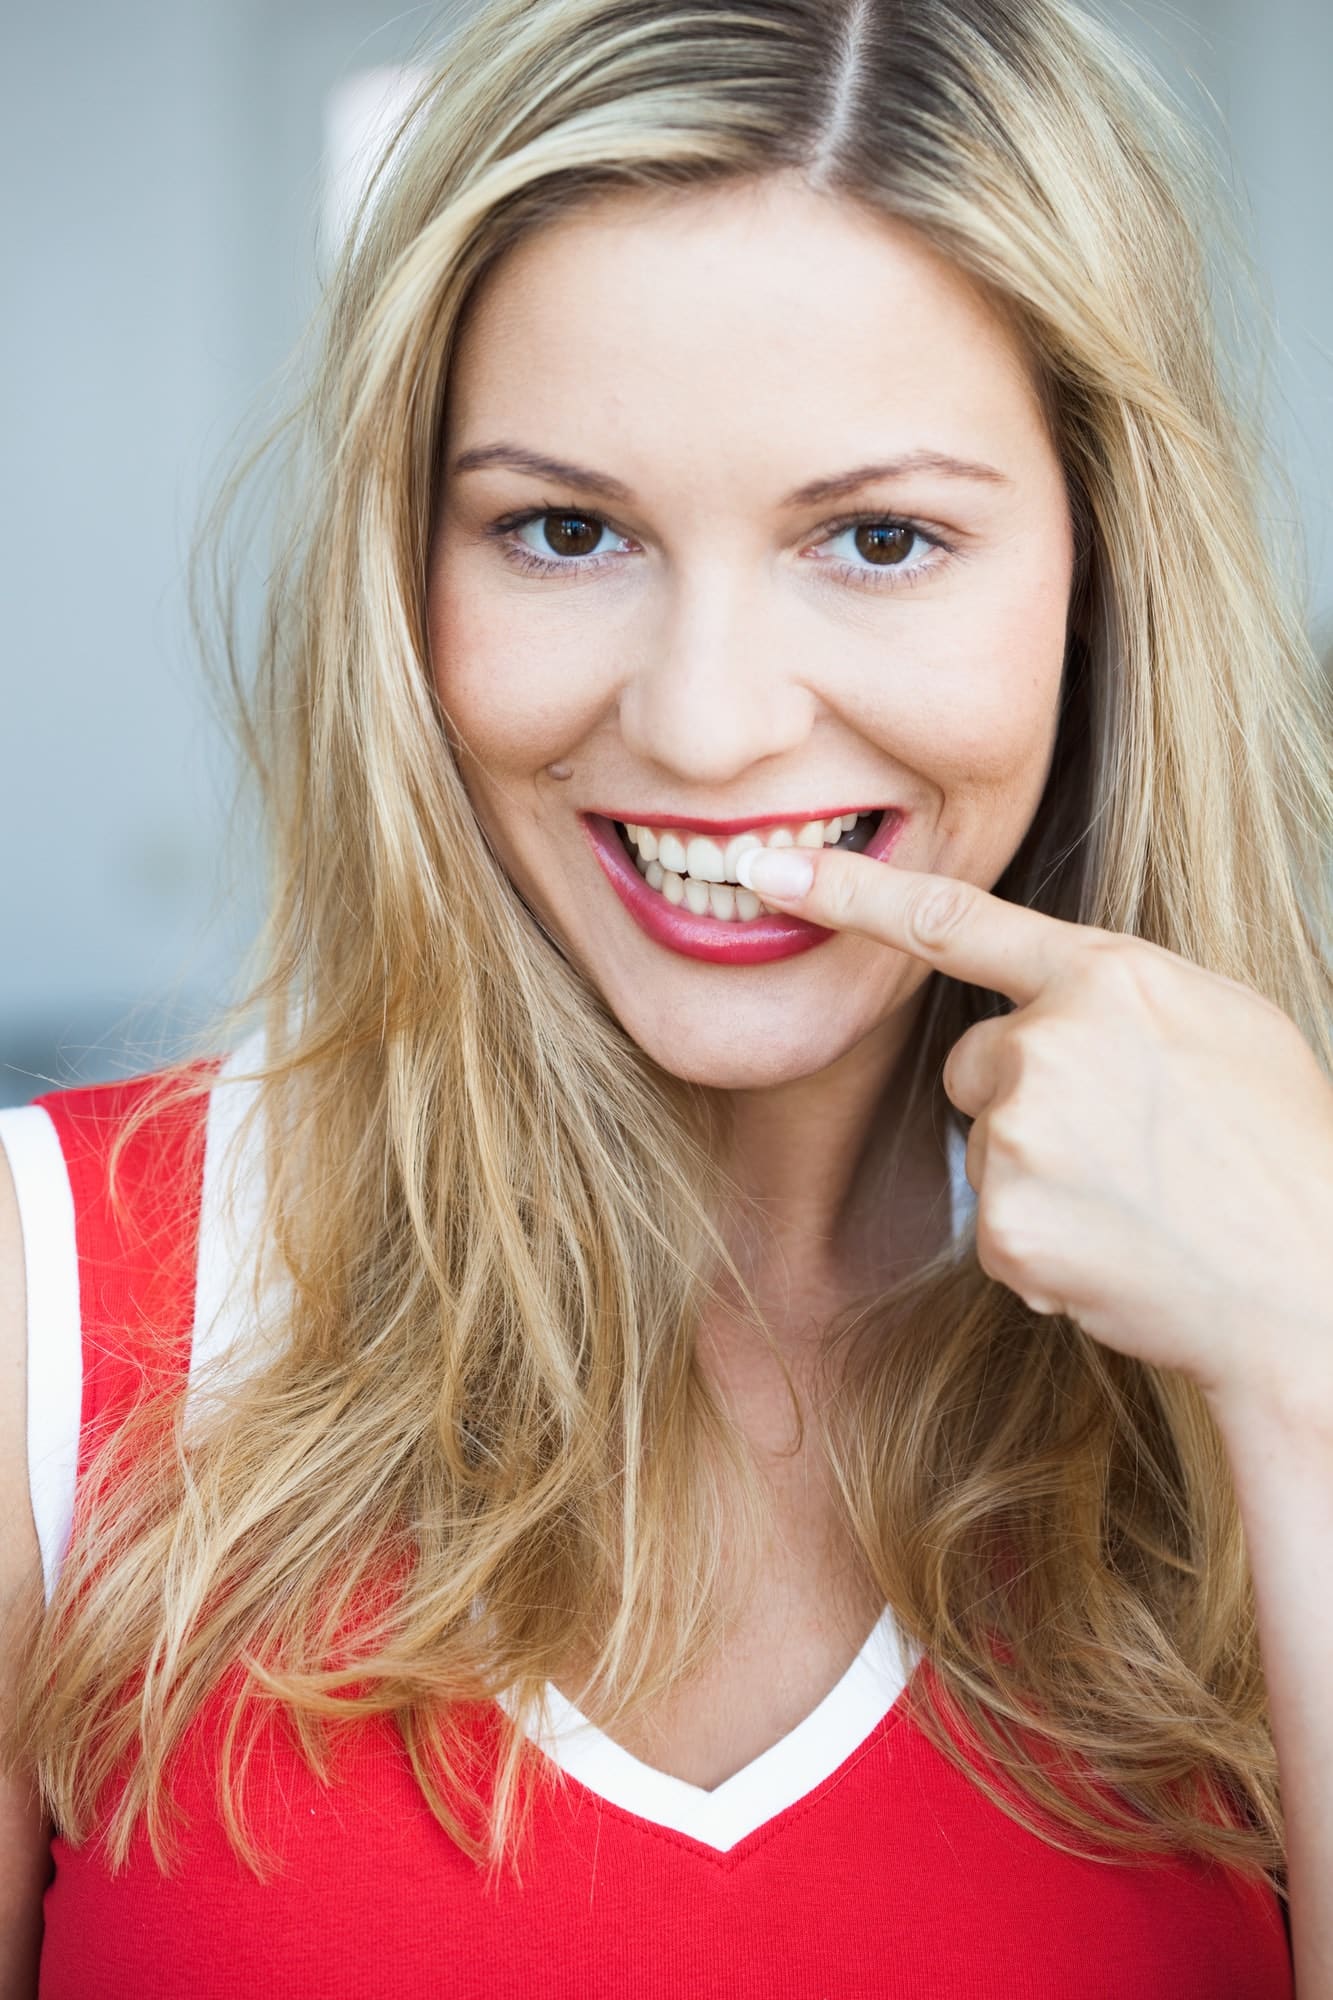 Young woman pointing at her teeth